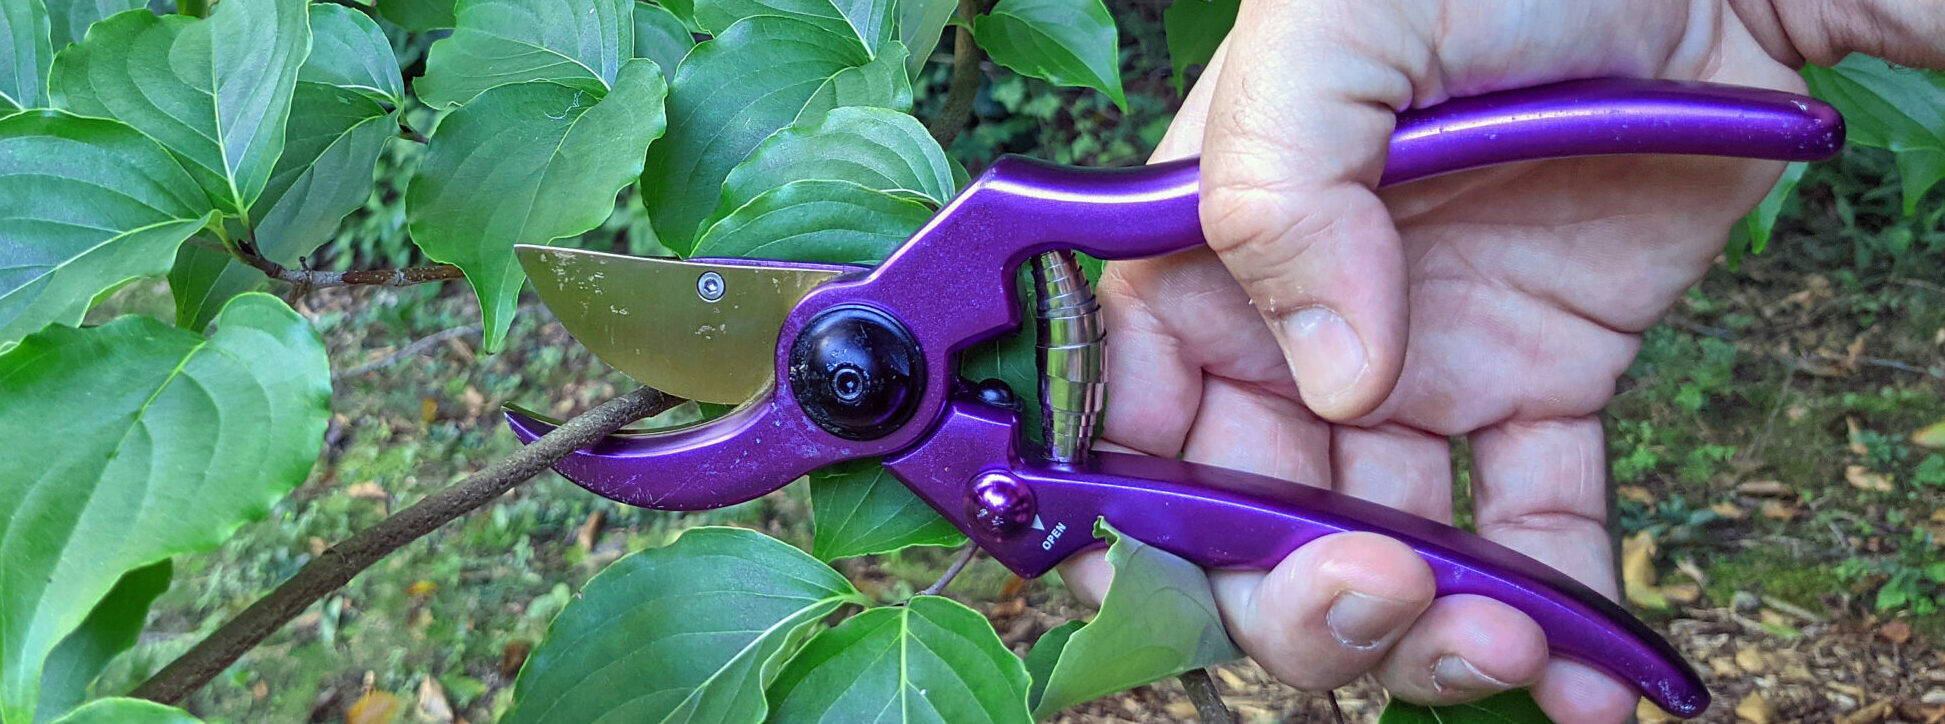 PLANTS & GARDENING :: GARDENING :: PRUNING AND CUTTING TOOLS [2] image -  Visual Dictionary Online